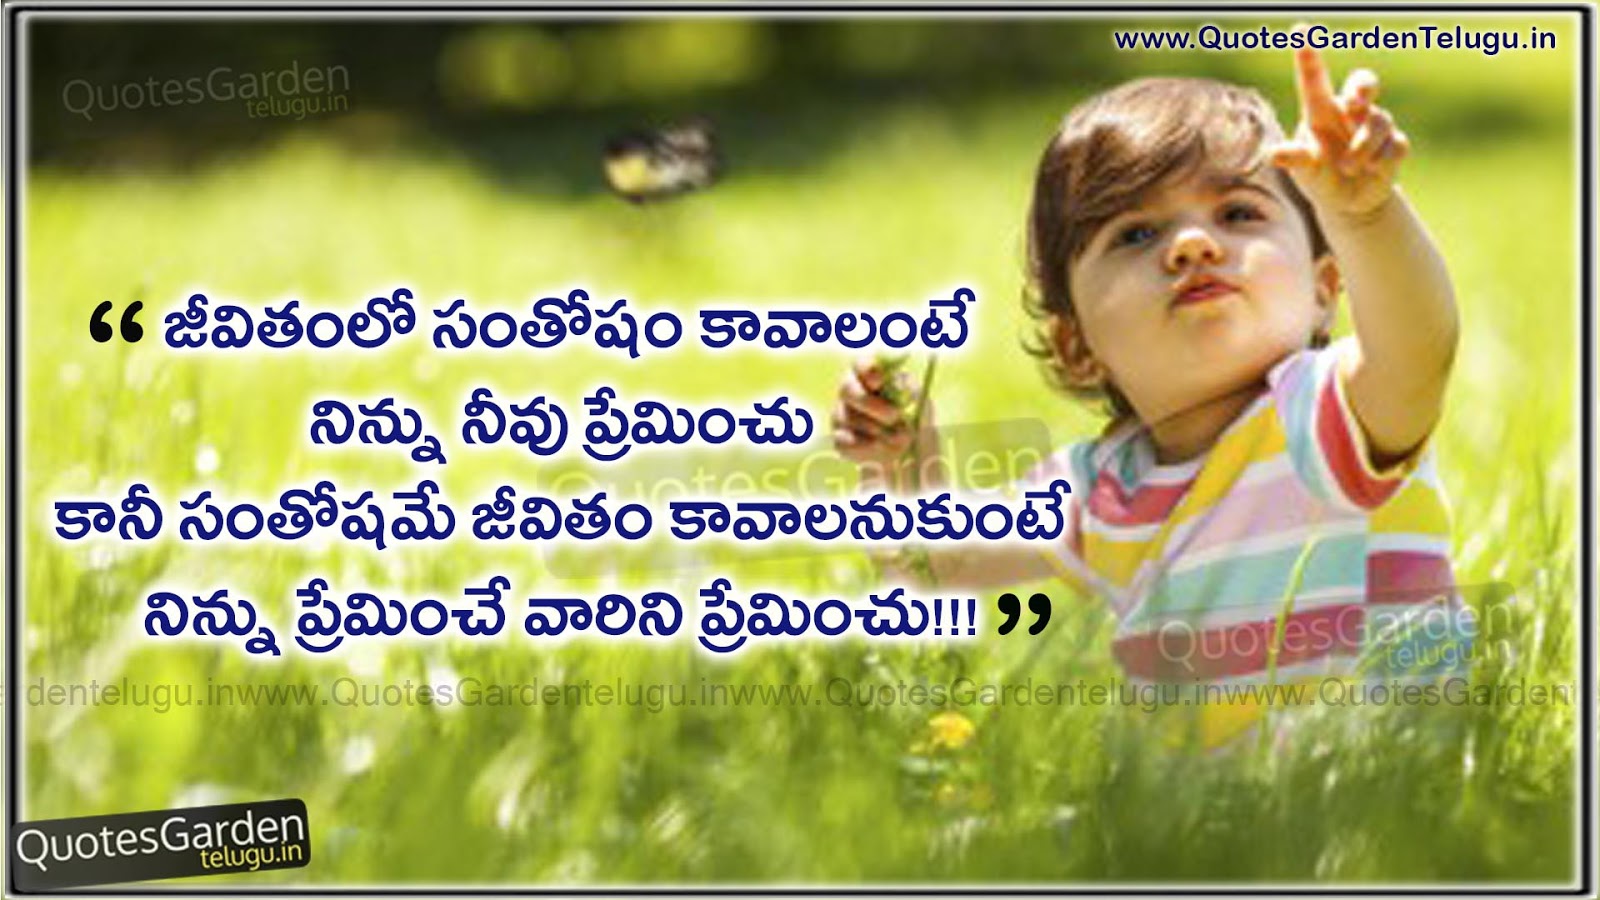 Best Telugu Life Quotes Wallpapers